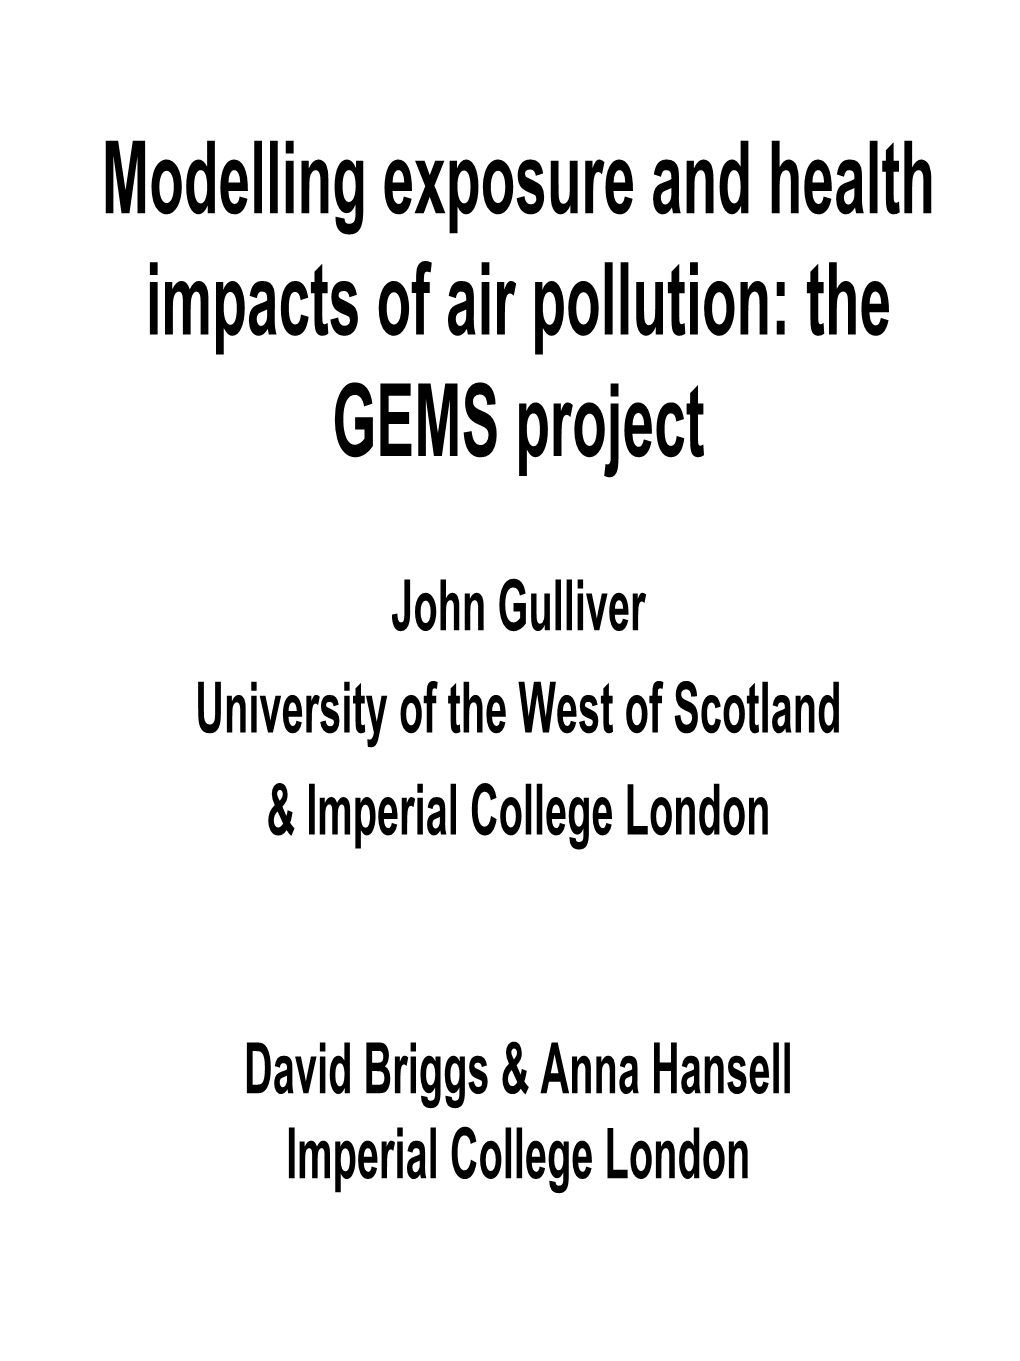 Modelling Exposure and Health Impacts of Air Pollution: the GEMS Project